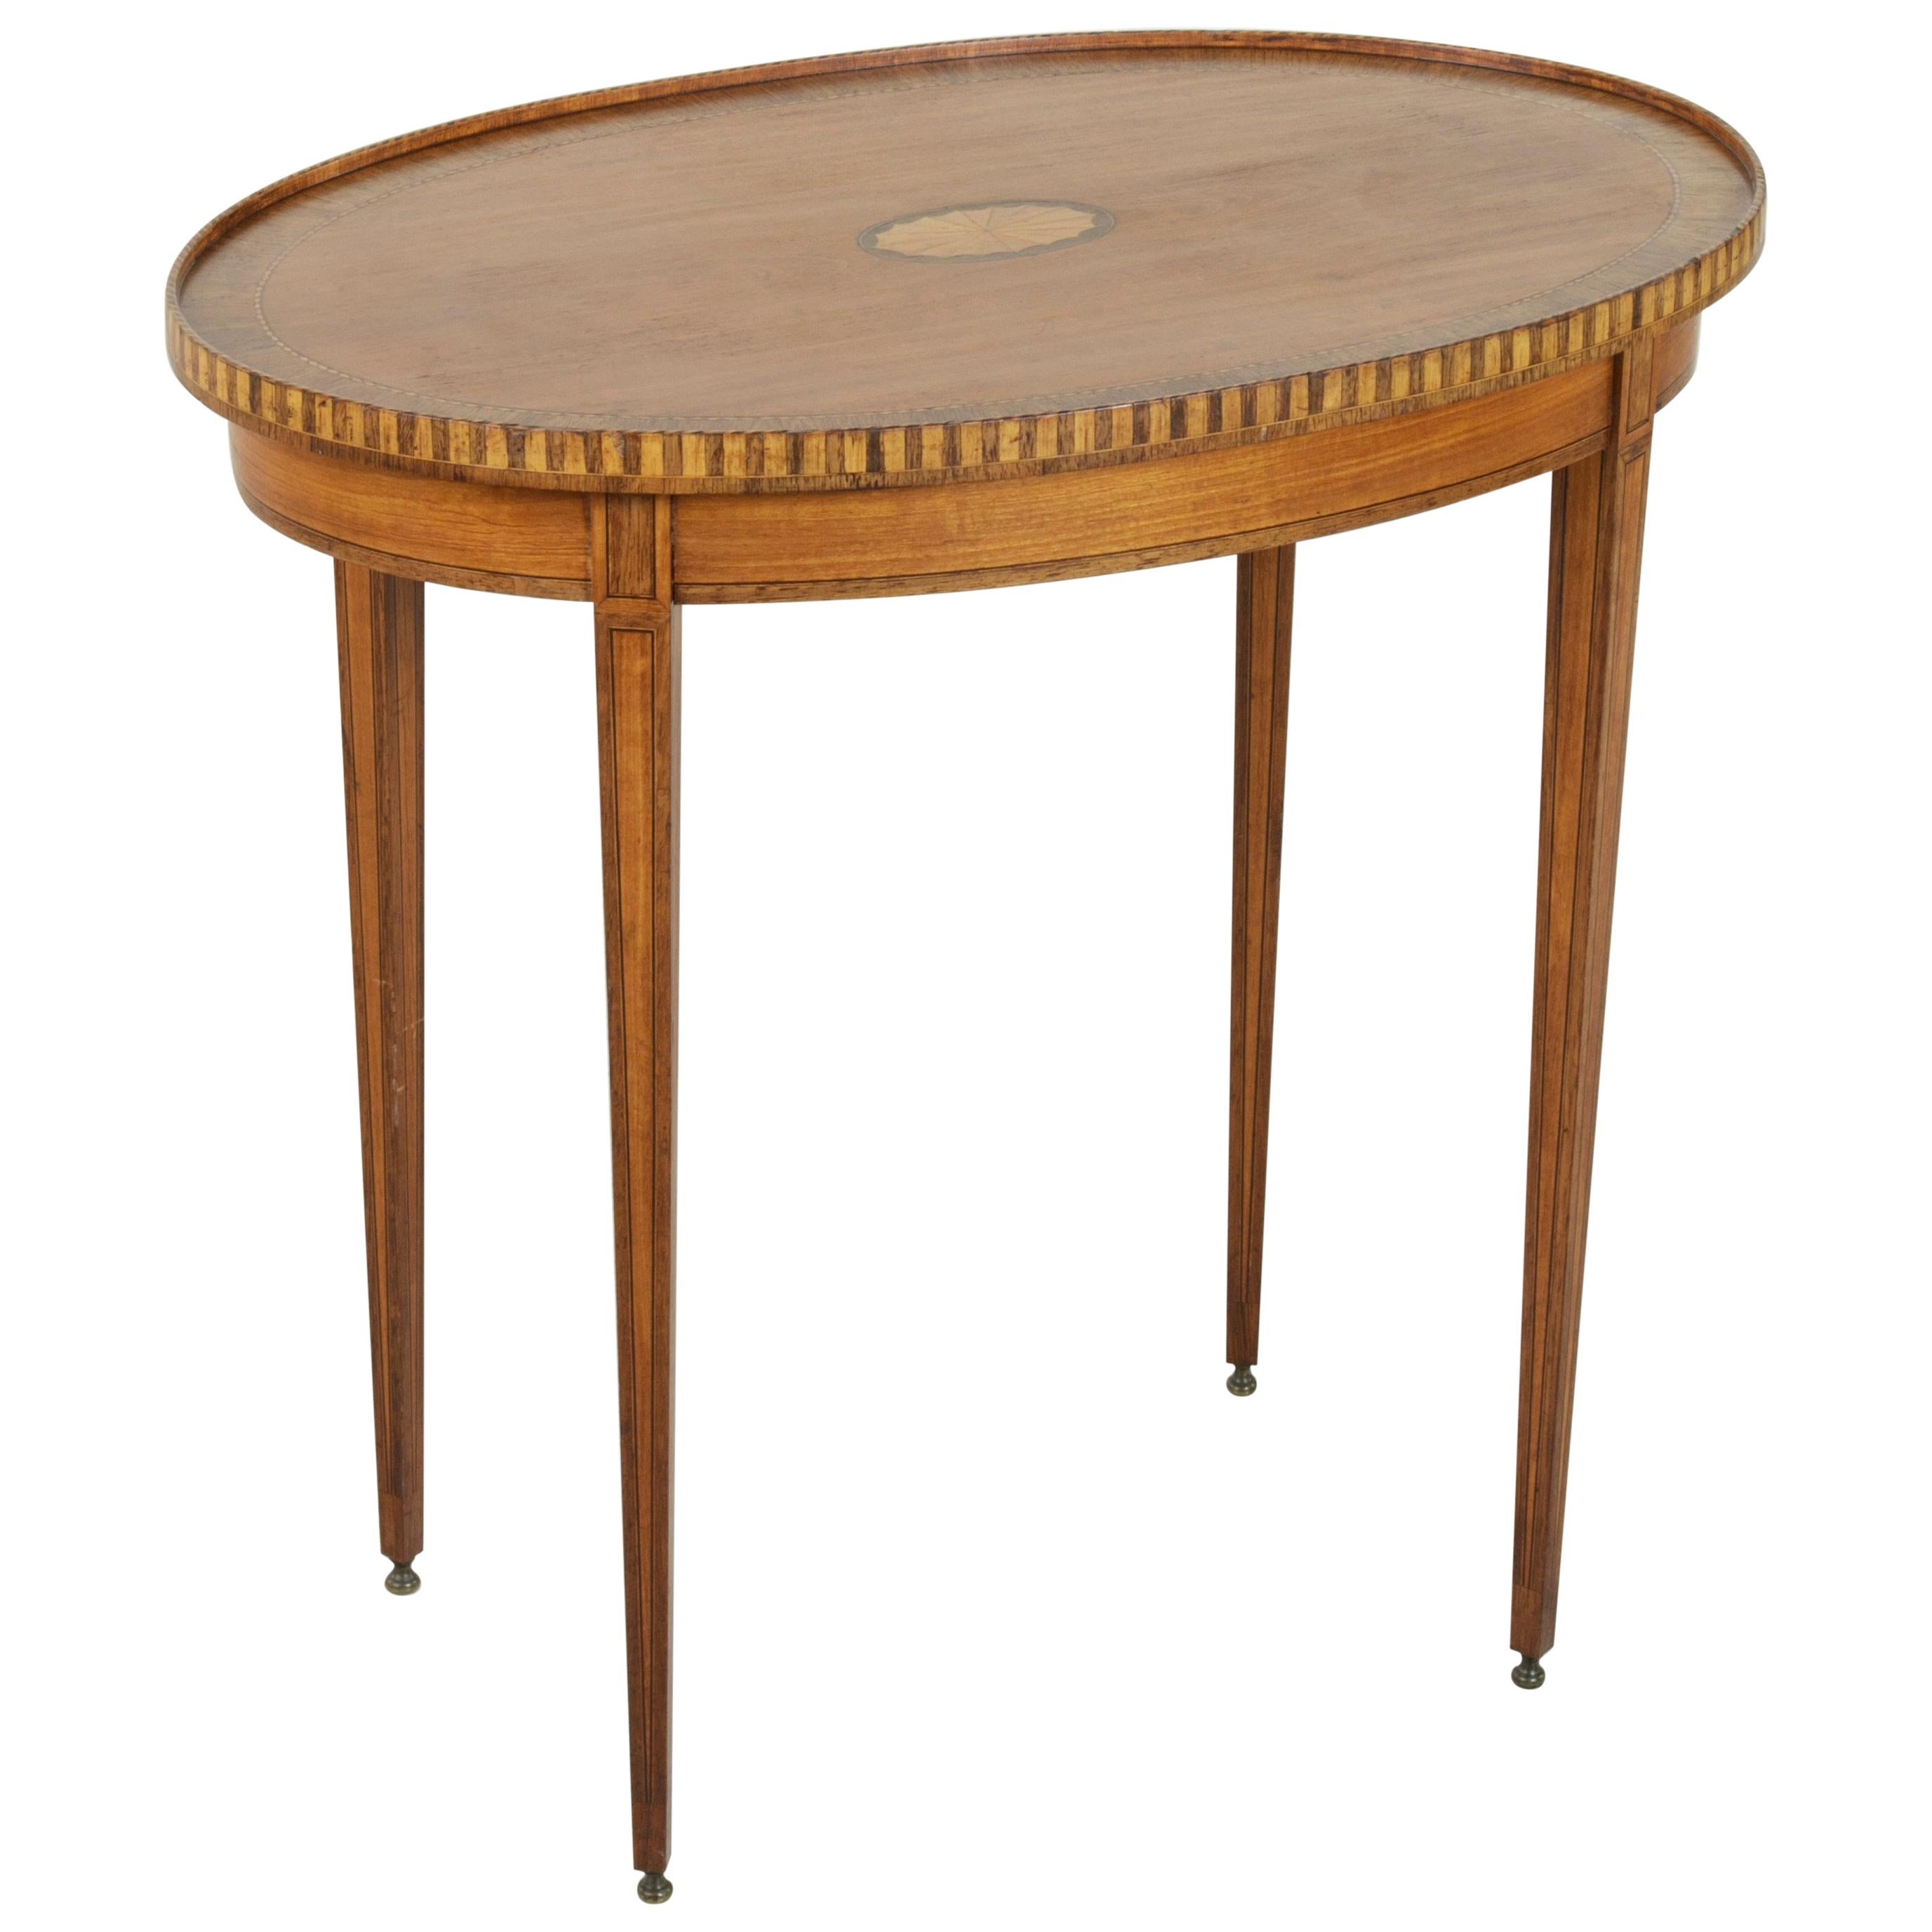 Early 20th Century French Neoclassic Louis XVI Style Oval Marquetry Side Table